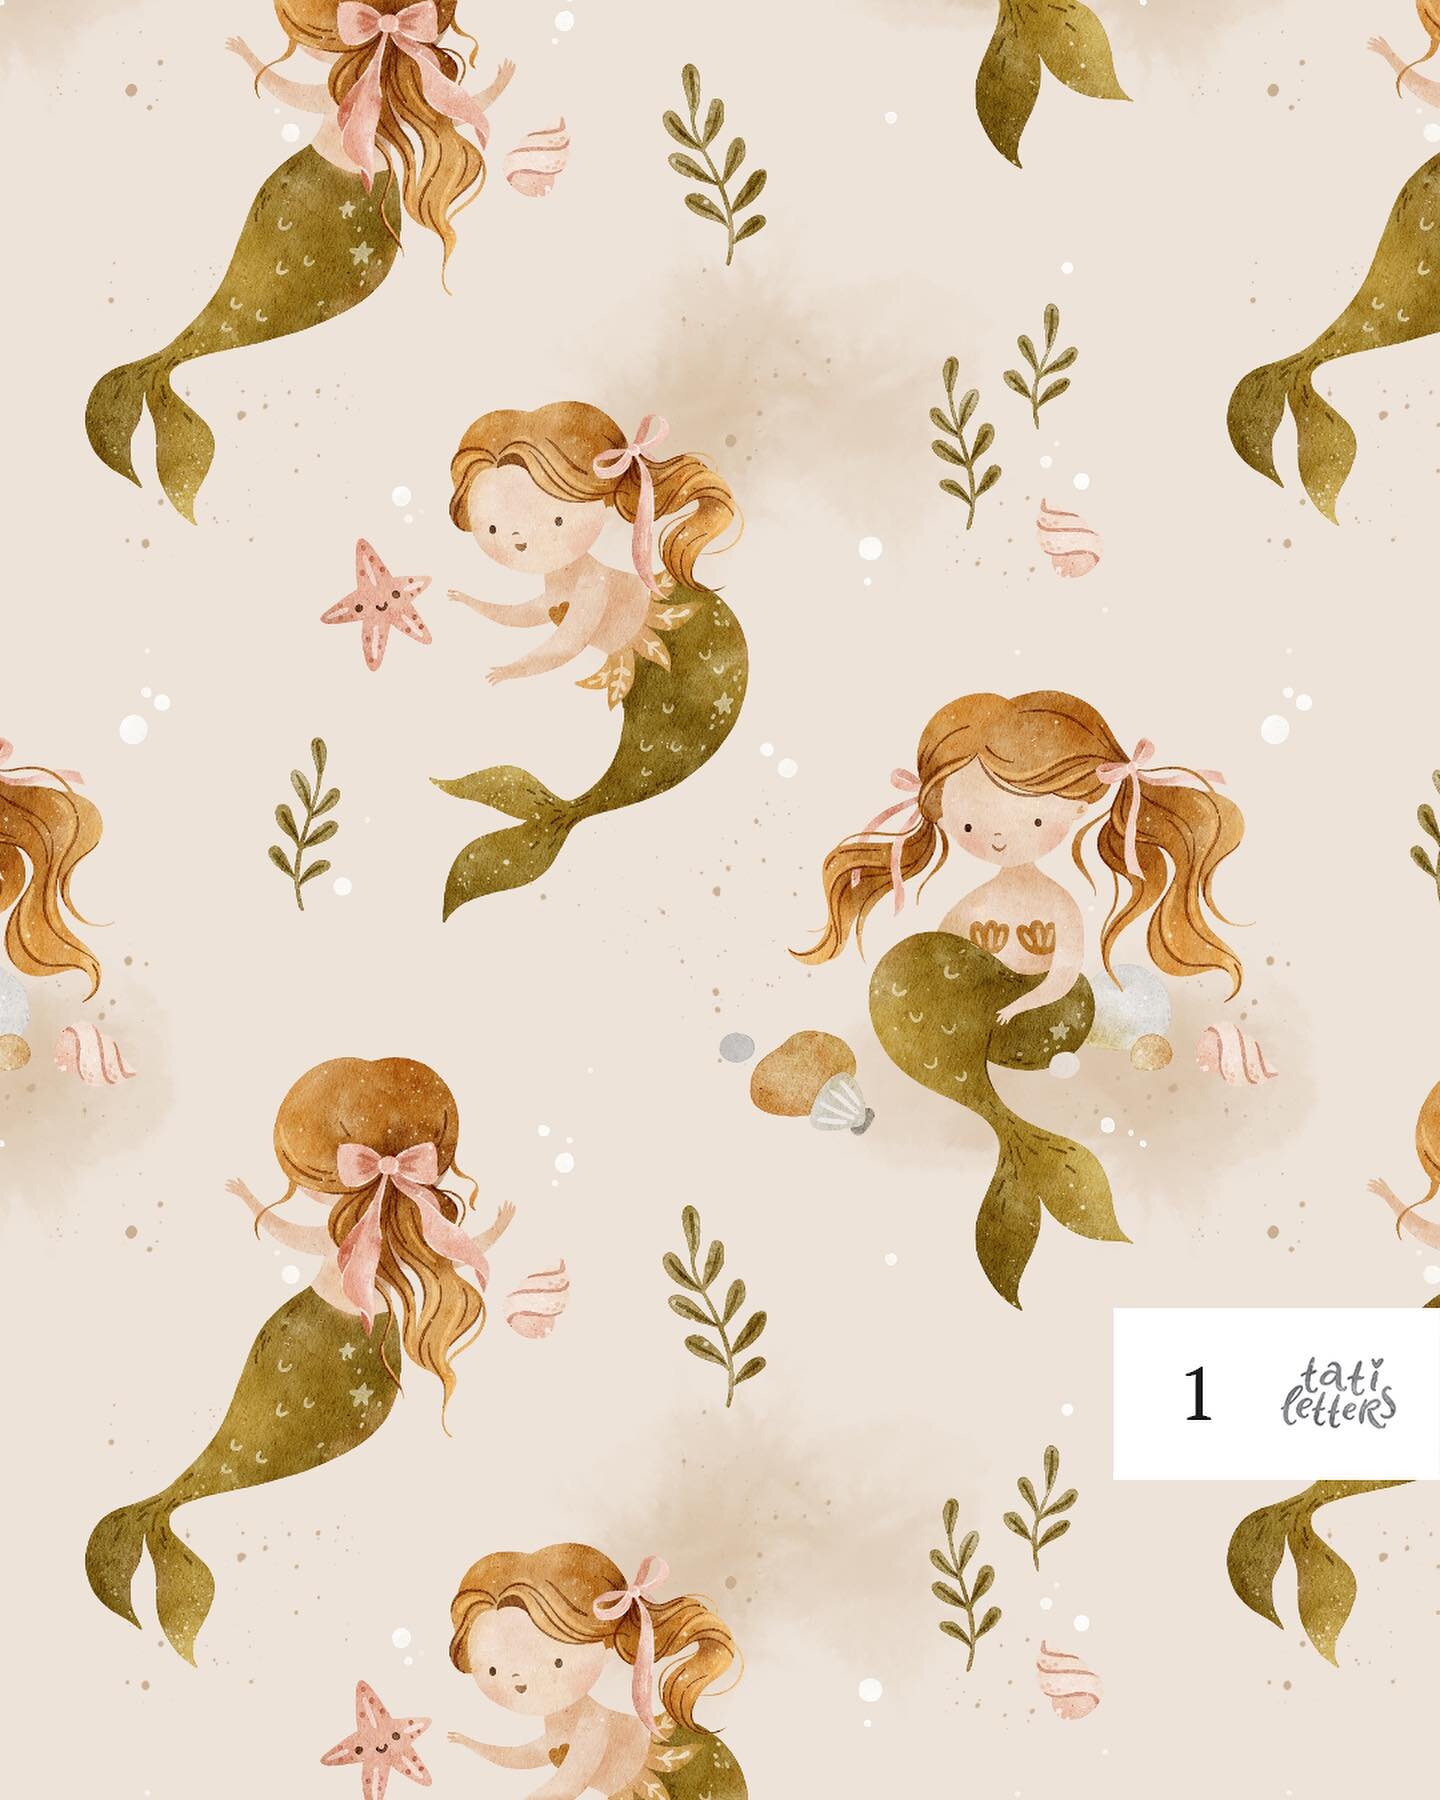 Little Mermaid 🌊 Exclusive seamless pattern
🖤 Comment to claim for colour
&euro;40 per exclusive colourway:
⠀
01 
02 🖤 claimed
03 
04 🖤 claimed
05 
06 
07 
08 
⠀
25x25 cm tile, JPEG 300dpi
Background color can be tweaked
Clipart &euro;15

Payment